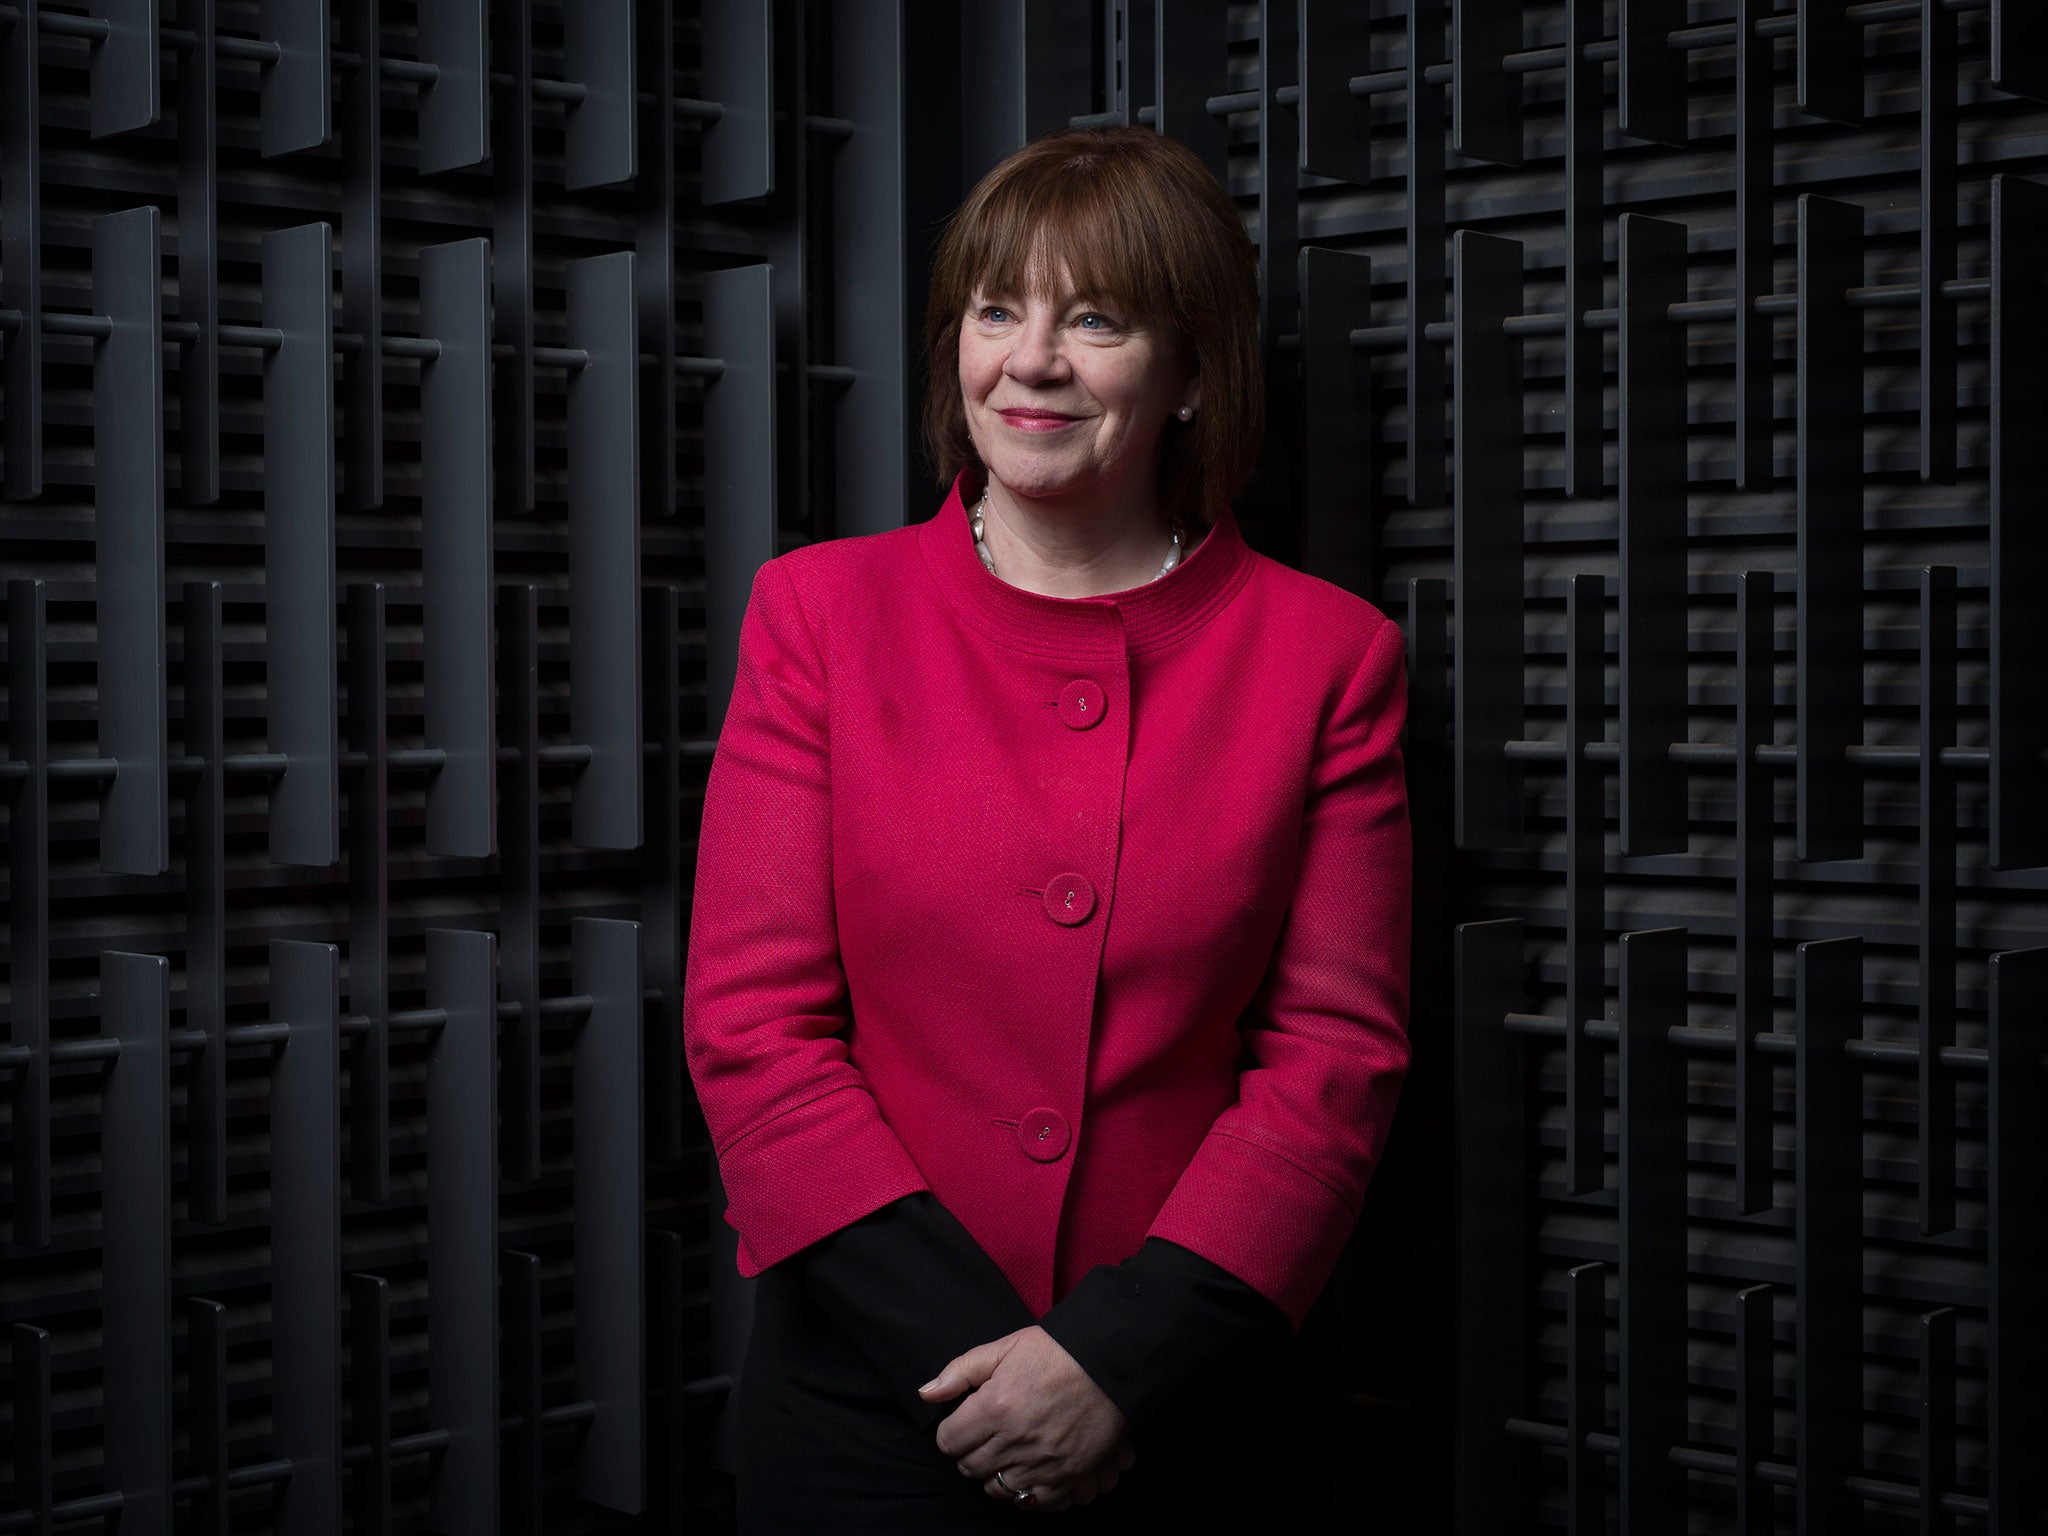 Dame Colette Bowe, chair of the Banking Standards Board, believes banking is no worse than any other industry